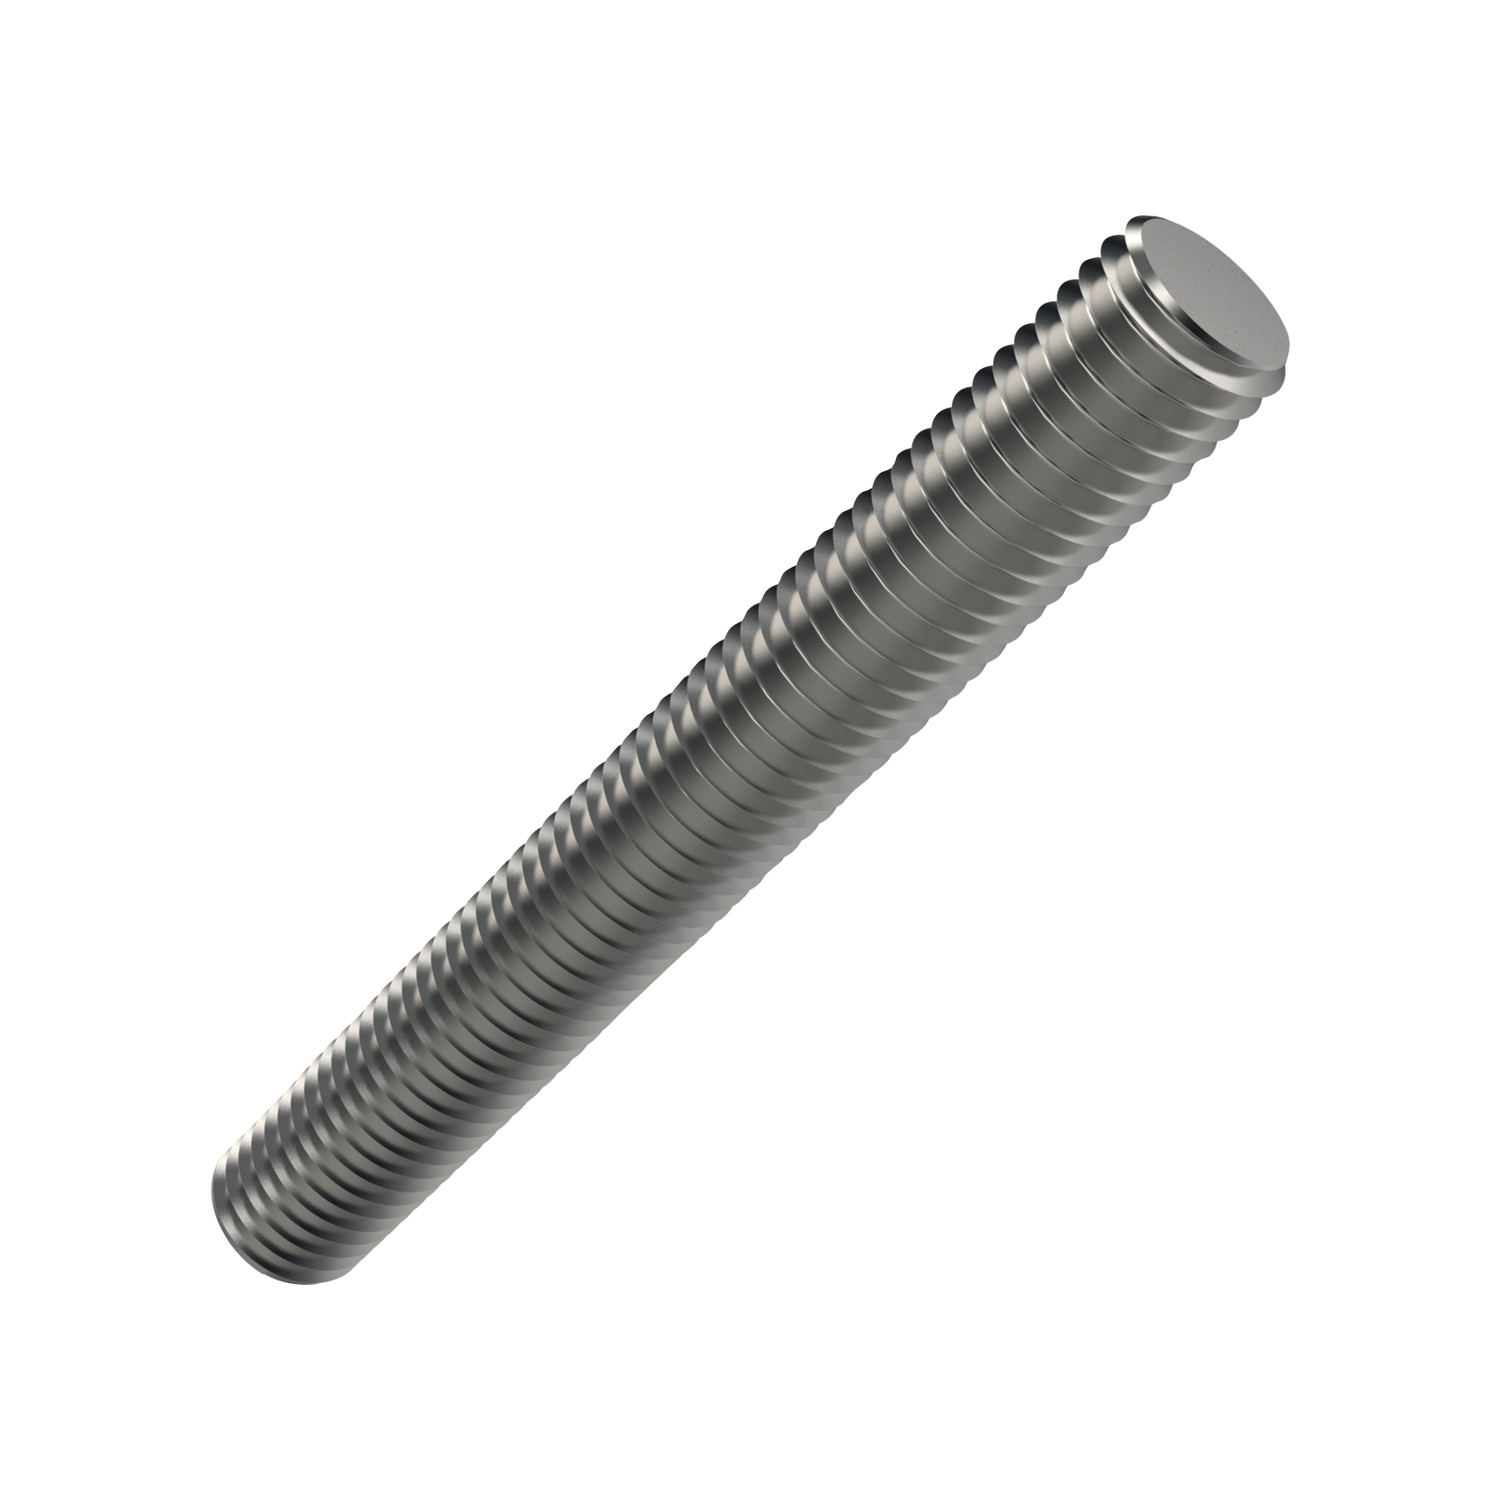 Stainless Threaded Rod Stainless steel (A2 class 70 & A4 class 70).